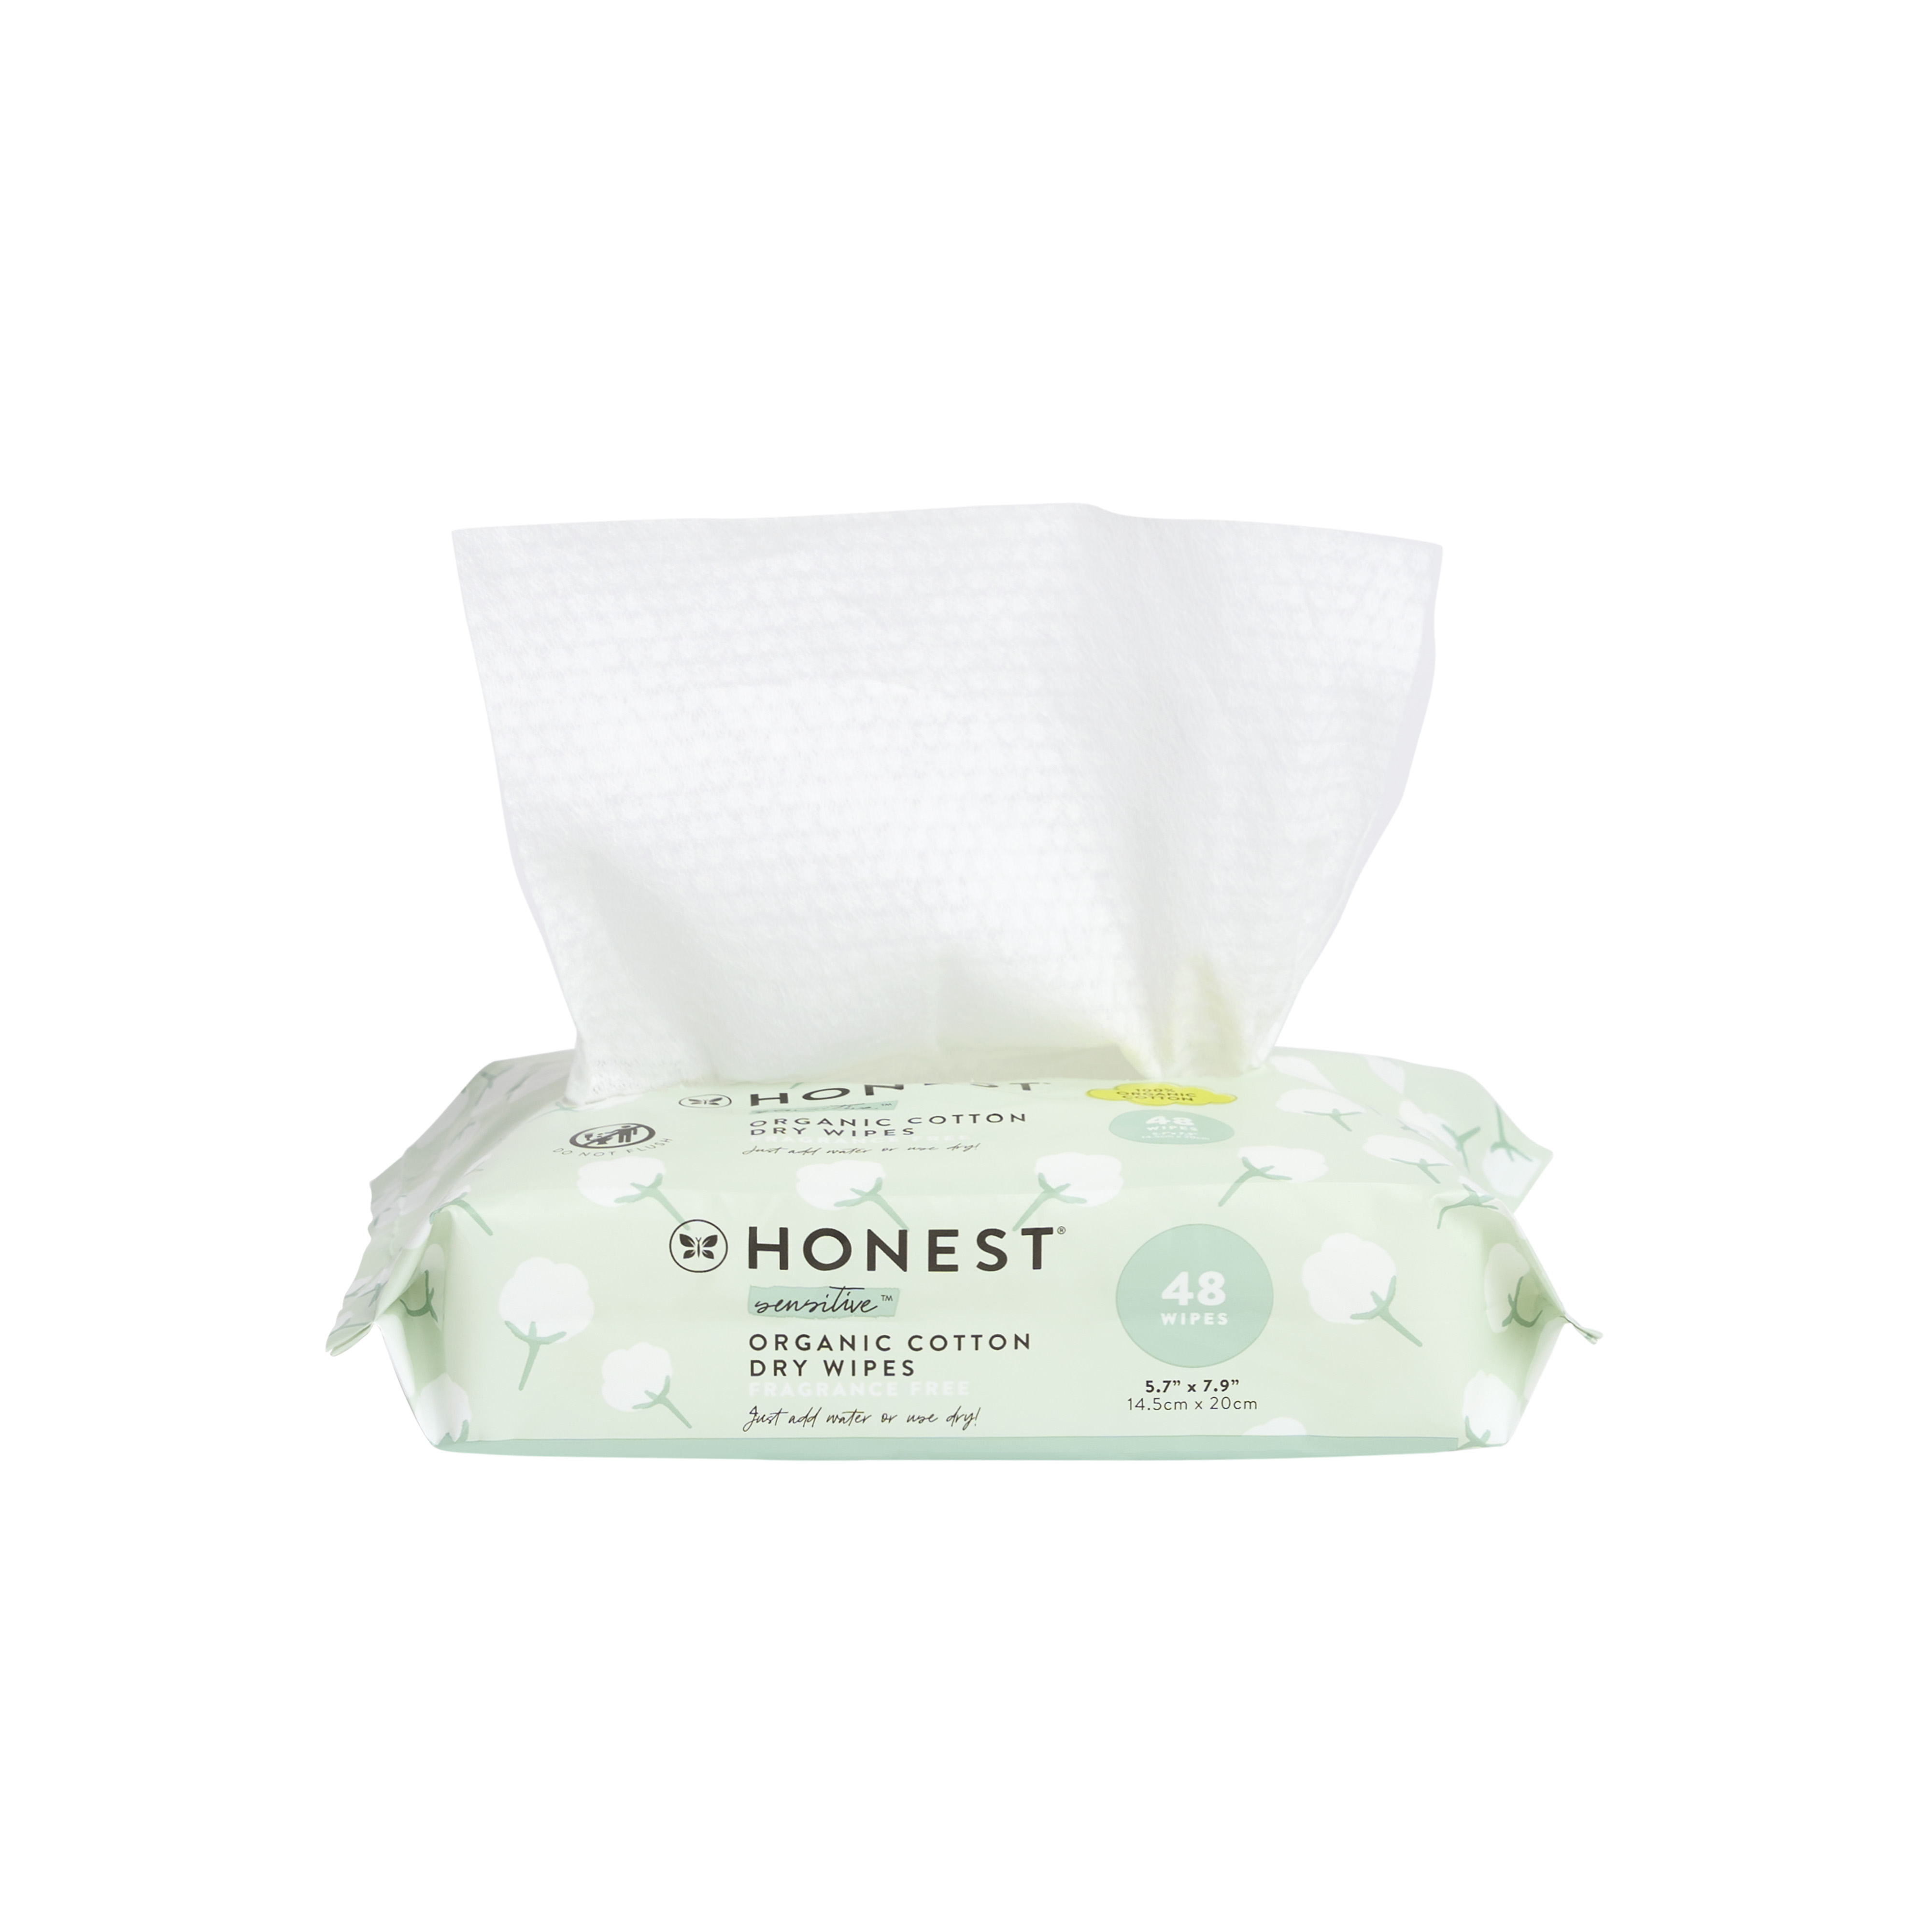 Honest Dry Baby Wipes, 48 Count, Hypoallergenic, Organic Cotton